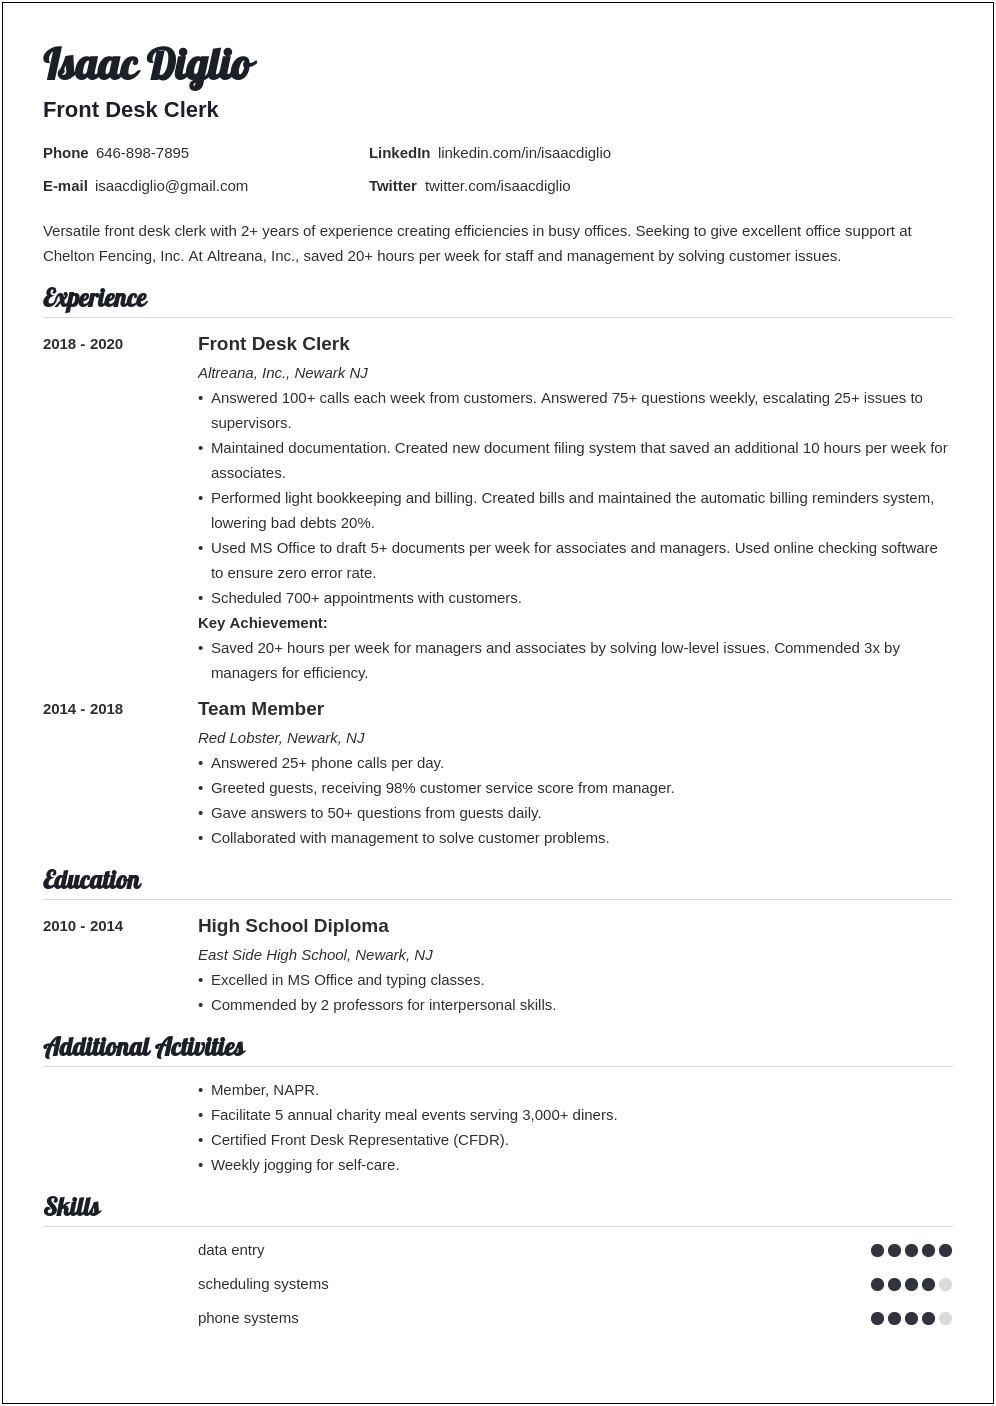 Resume Format For Front Office Manager